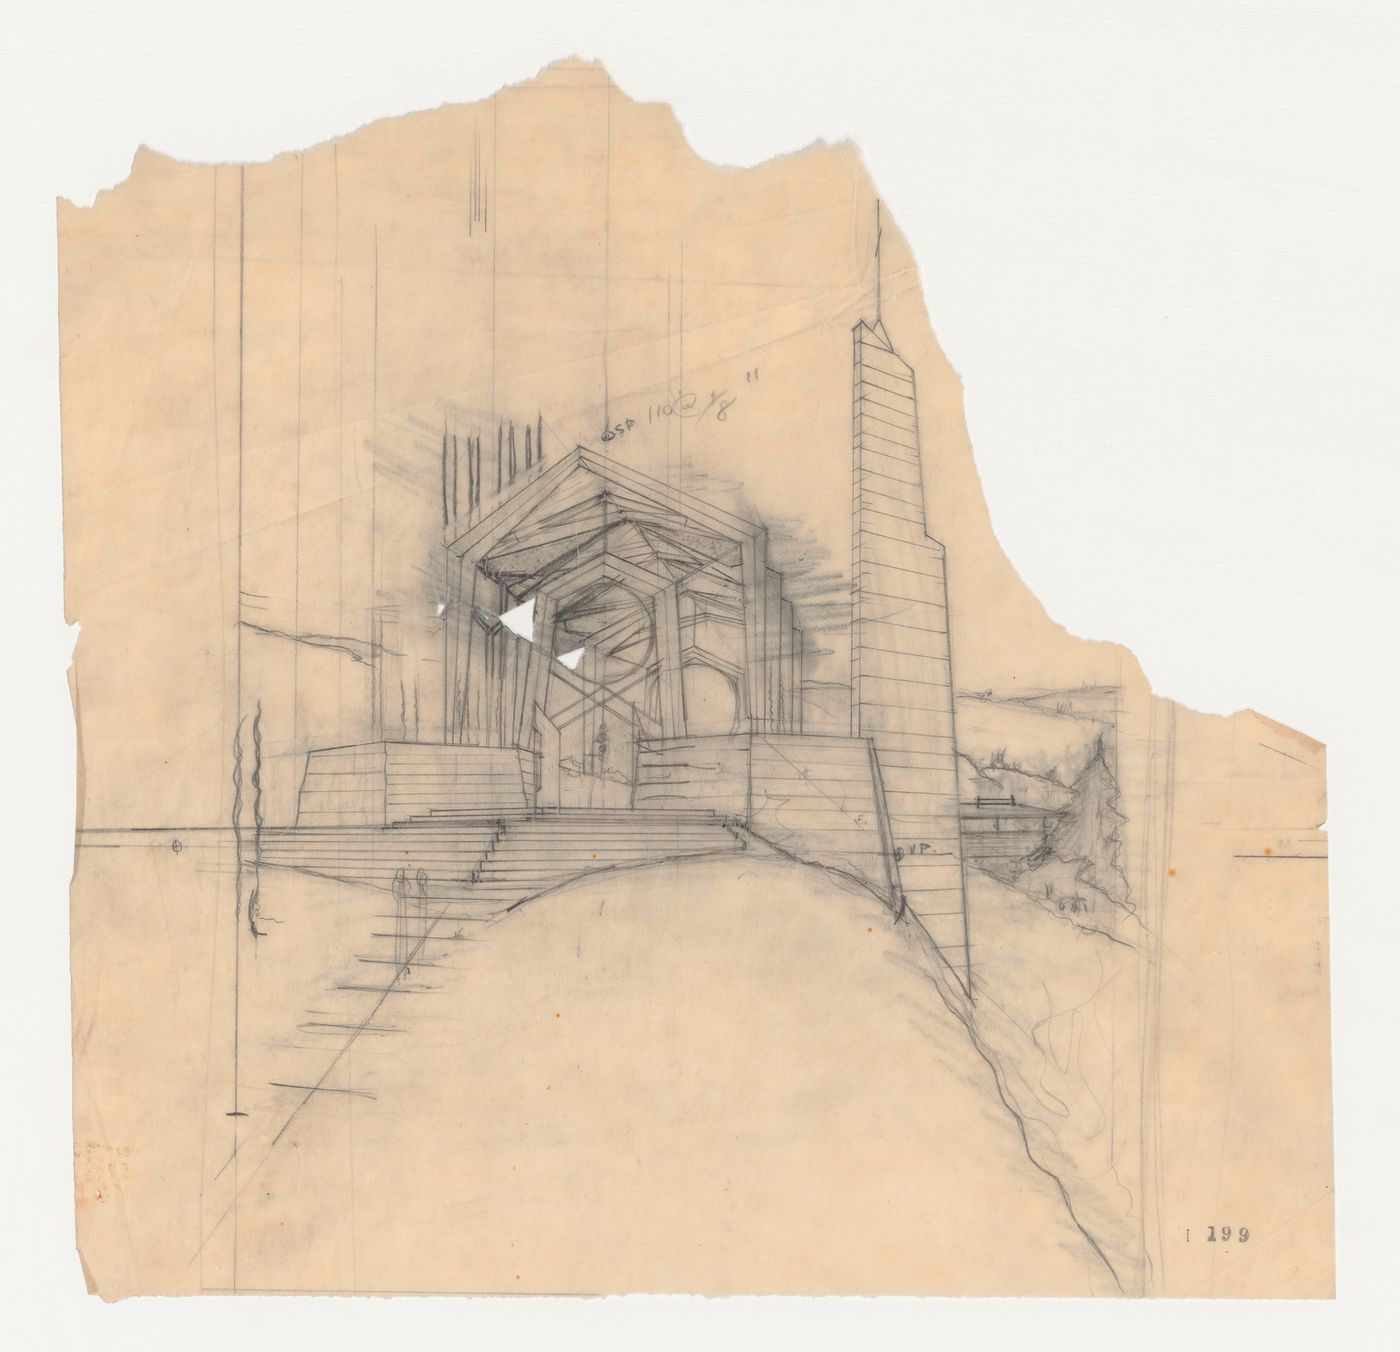 Wayfarers' Chapel, Palos Verdes, California: Preparatory drawing for a perspective for the chapel entrance